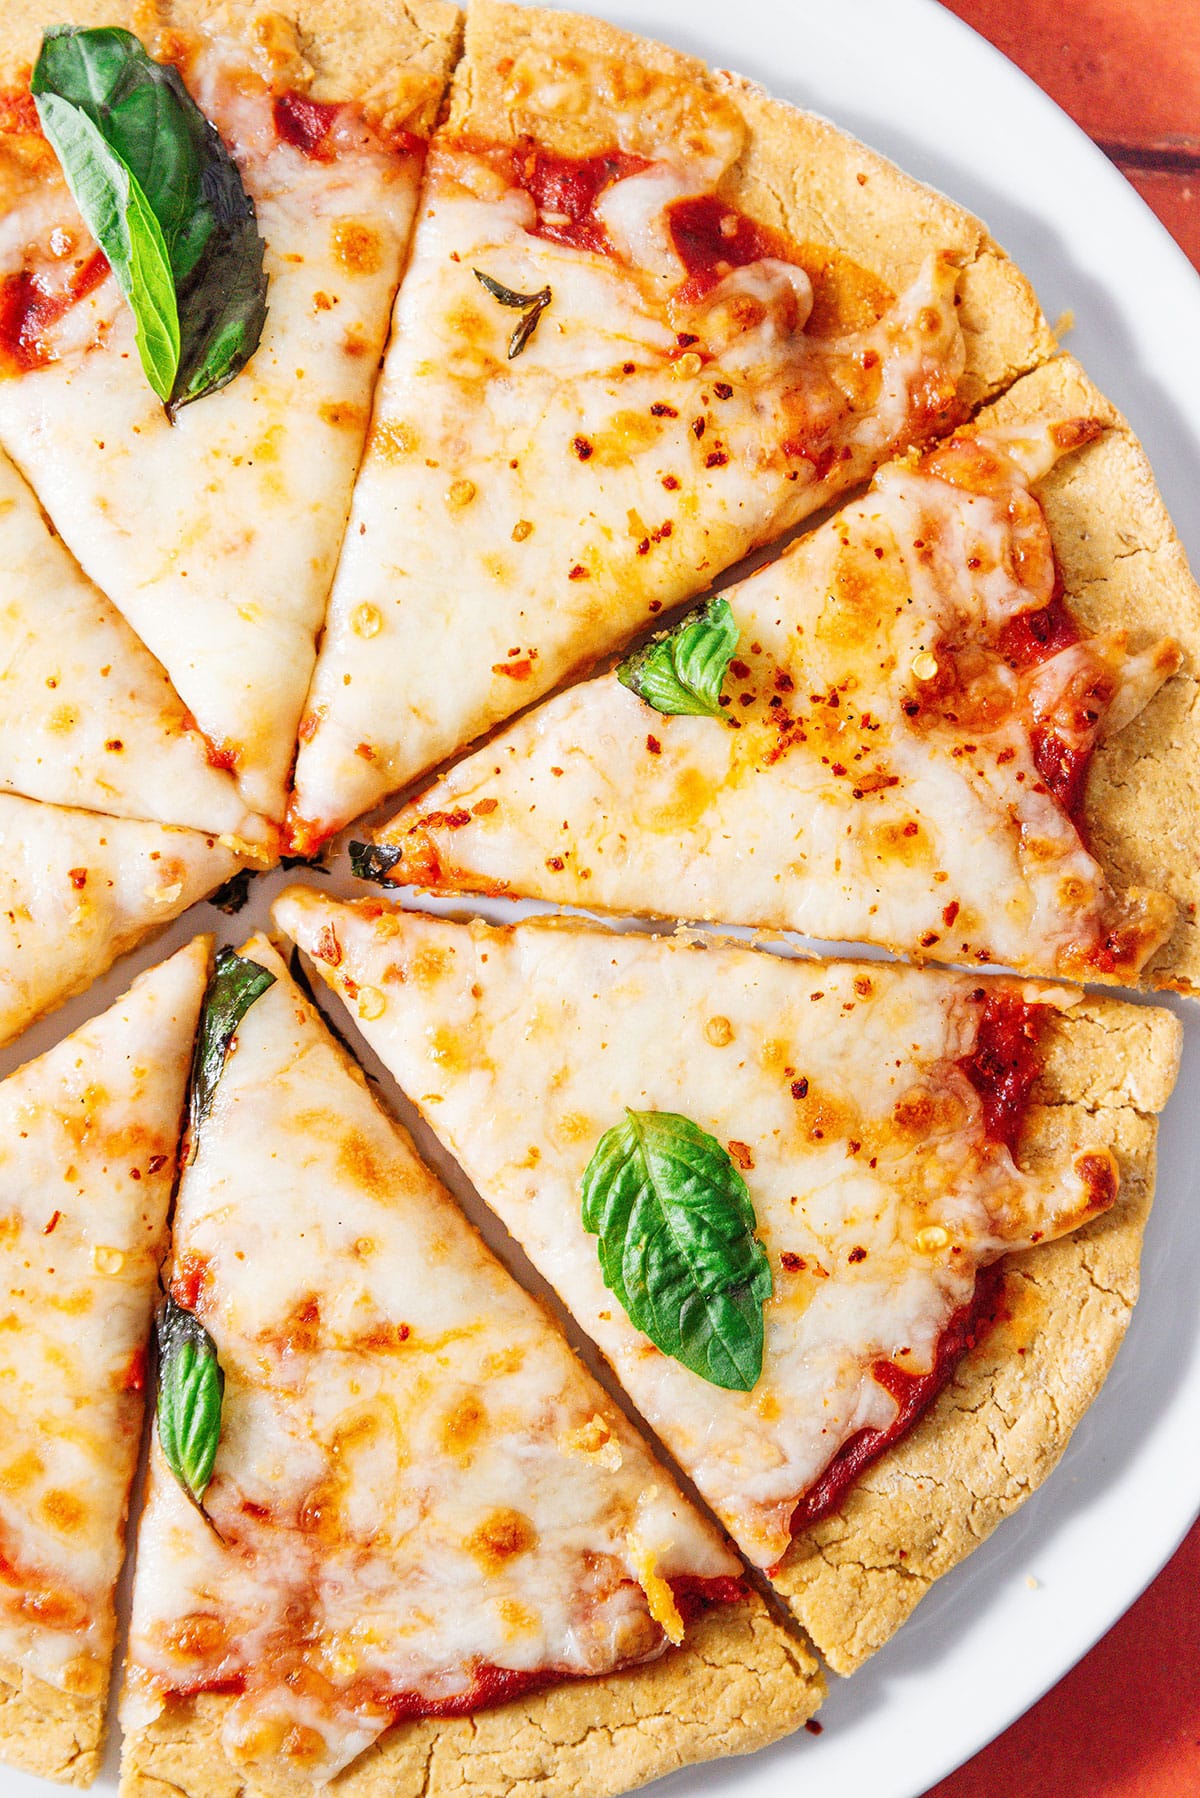 Chickpea pizza crust with cheese and basil.